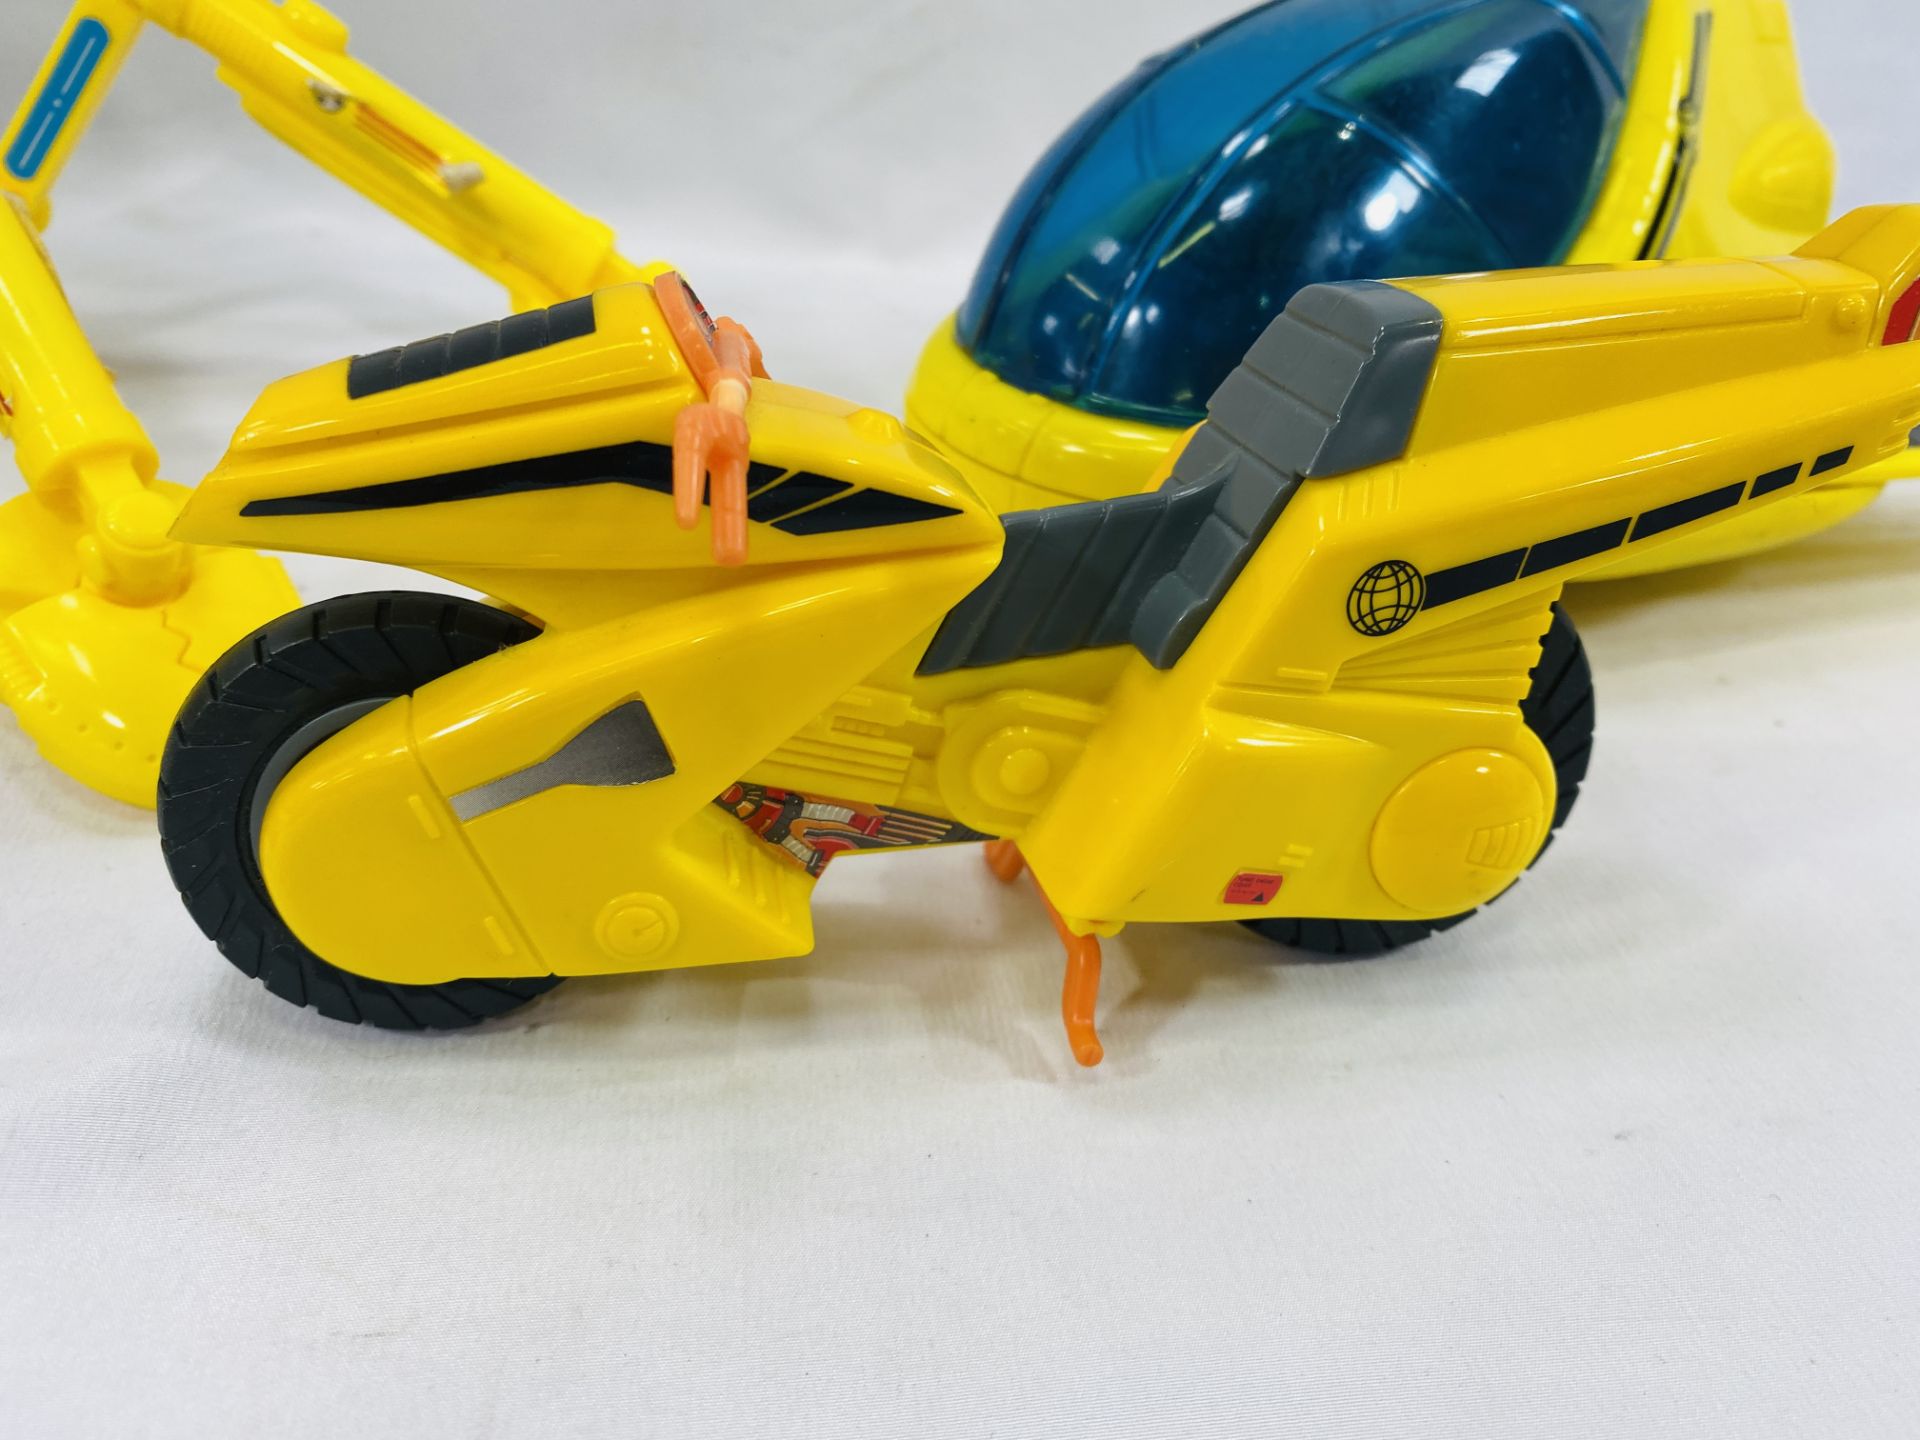 A Captain Planet vehicle, accessories and figure - Image 4 of 8